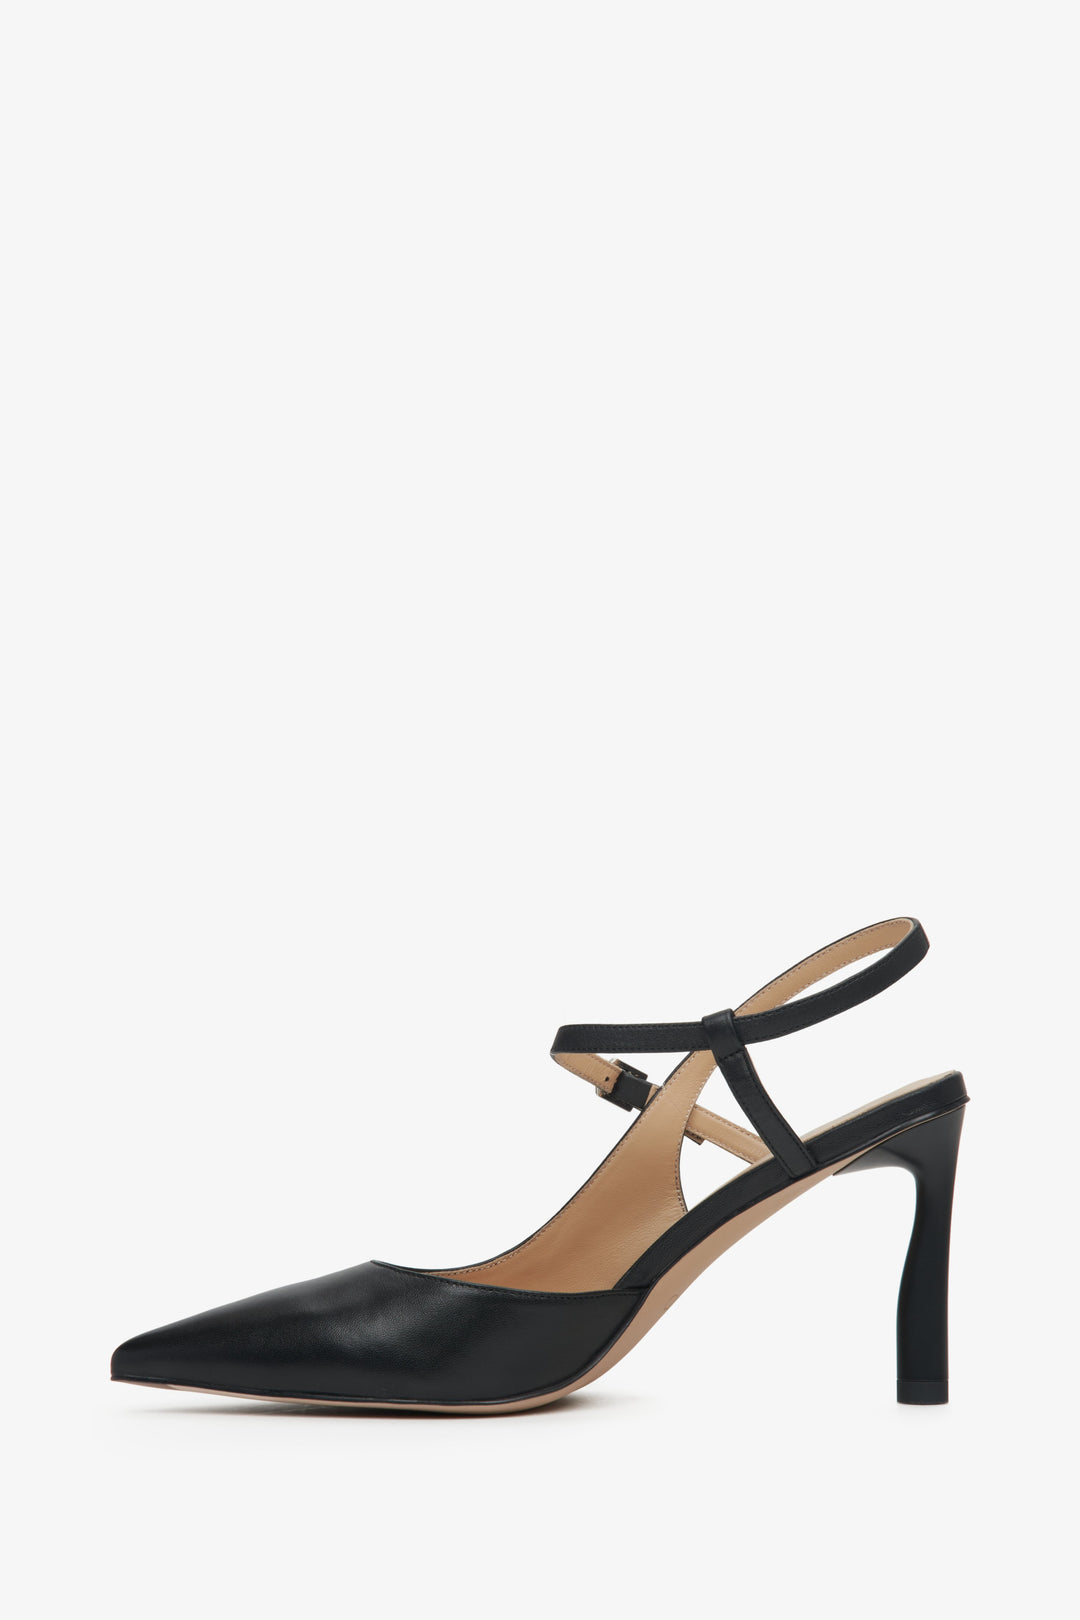 Estro slingback shoes with a pointed toe, made of black, natural leather.